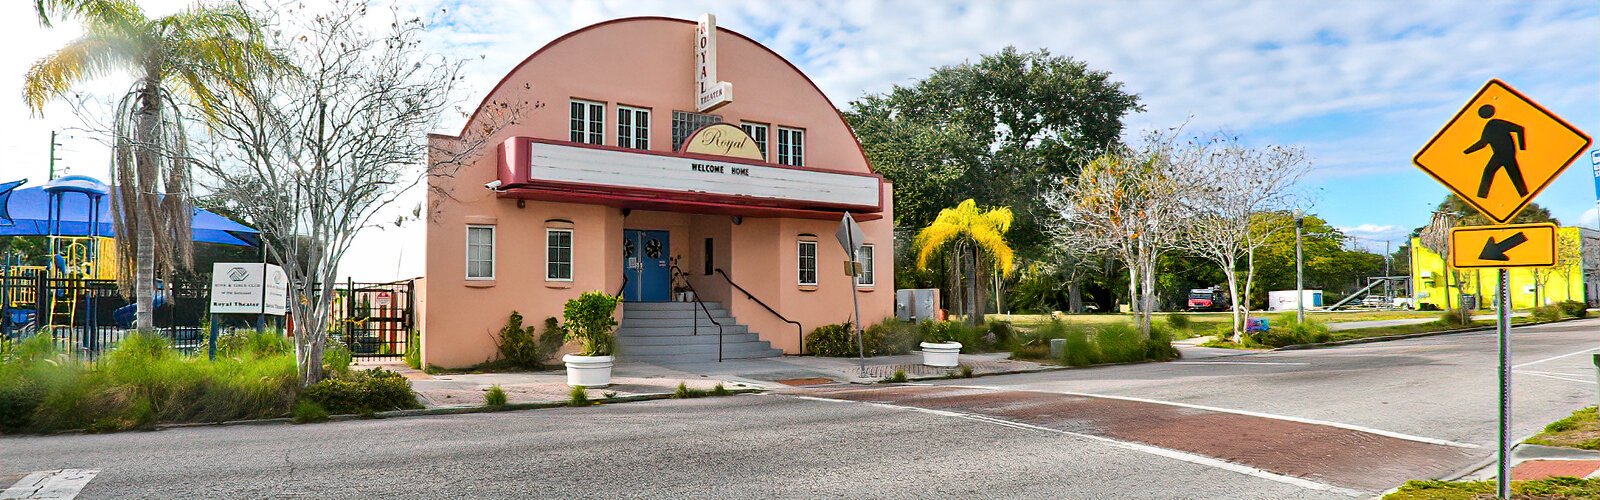 Built in 1948, the historic 700-seat Royal Theater was one of only two movie theaters for Black people in the Jim Crow era. Closed in 1965 then rehabilitated, it is now the Southside Boys and Girls Club.